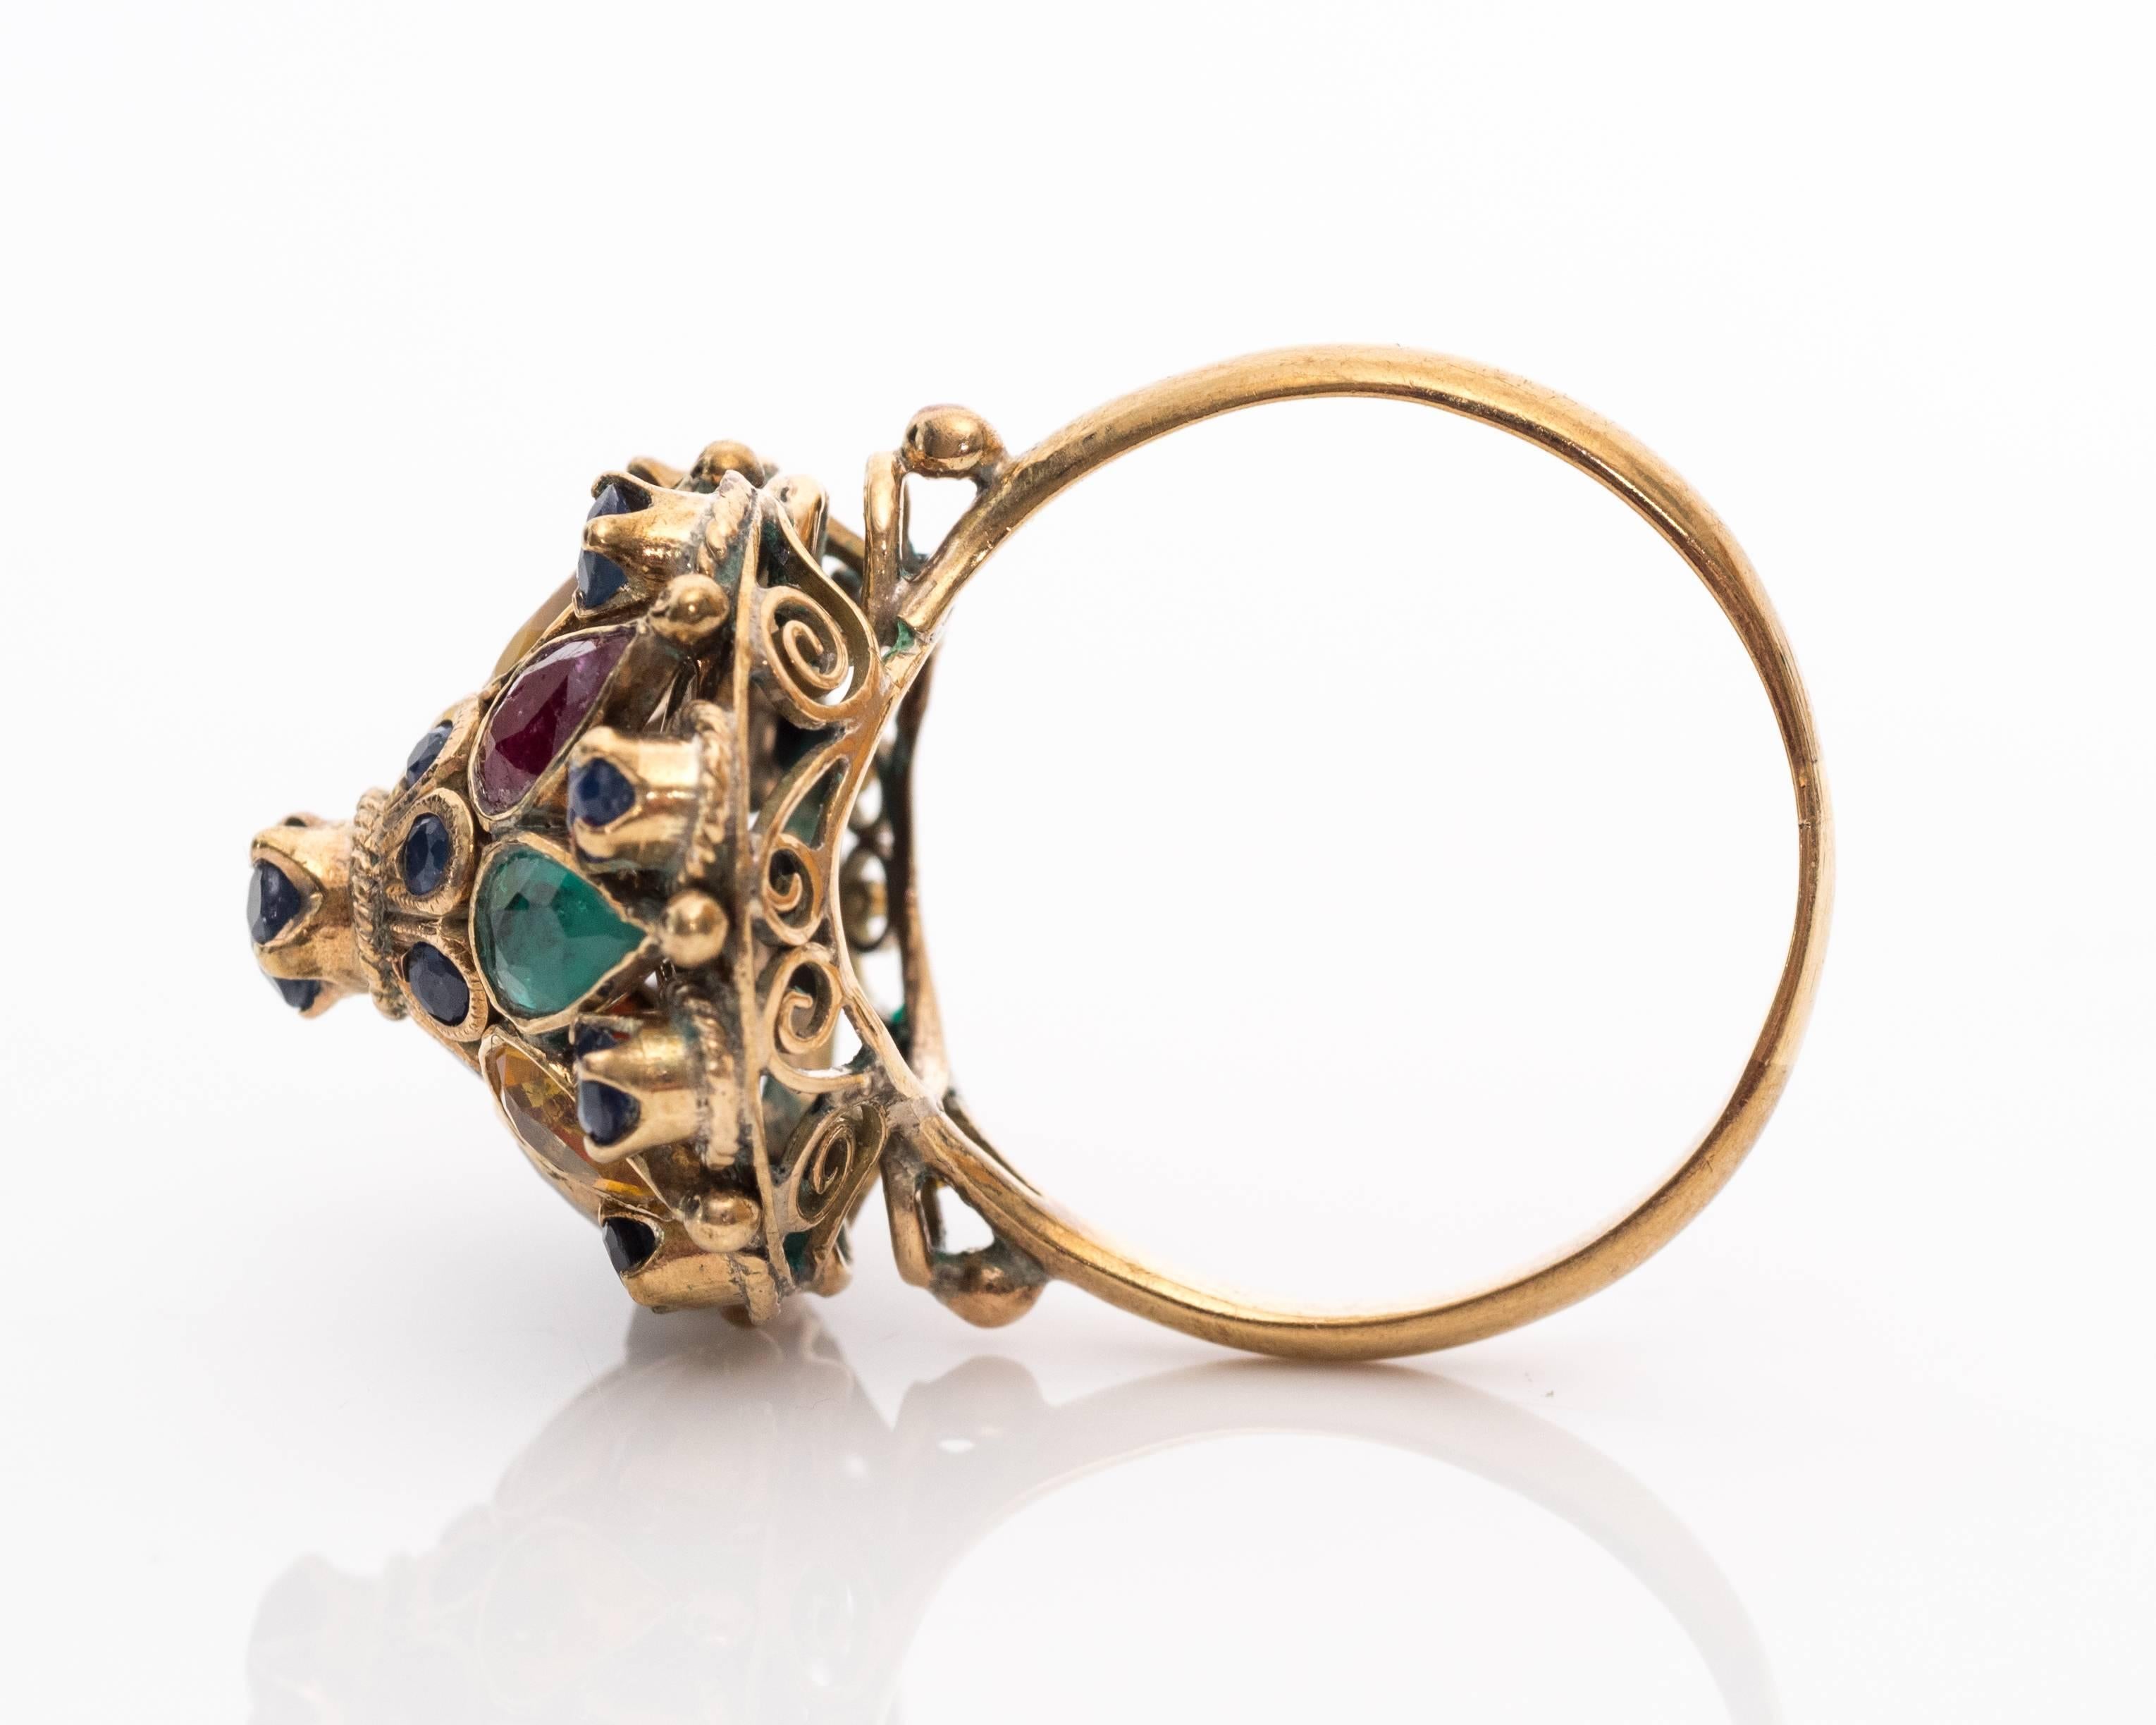 Gorgeous Multicolored and Multi-Gemstone 1940s Ring
Featuring Sapphires, Emeralds, Citrine, Amethyst, Garnet and Smokey Quartz
Lots of Color and Sparkle!

Top Tier features Sapphires, all Bezel Set 
Second Tier includes pear-shaped colorful